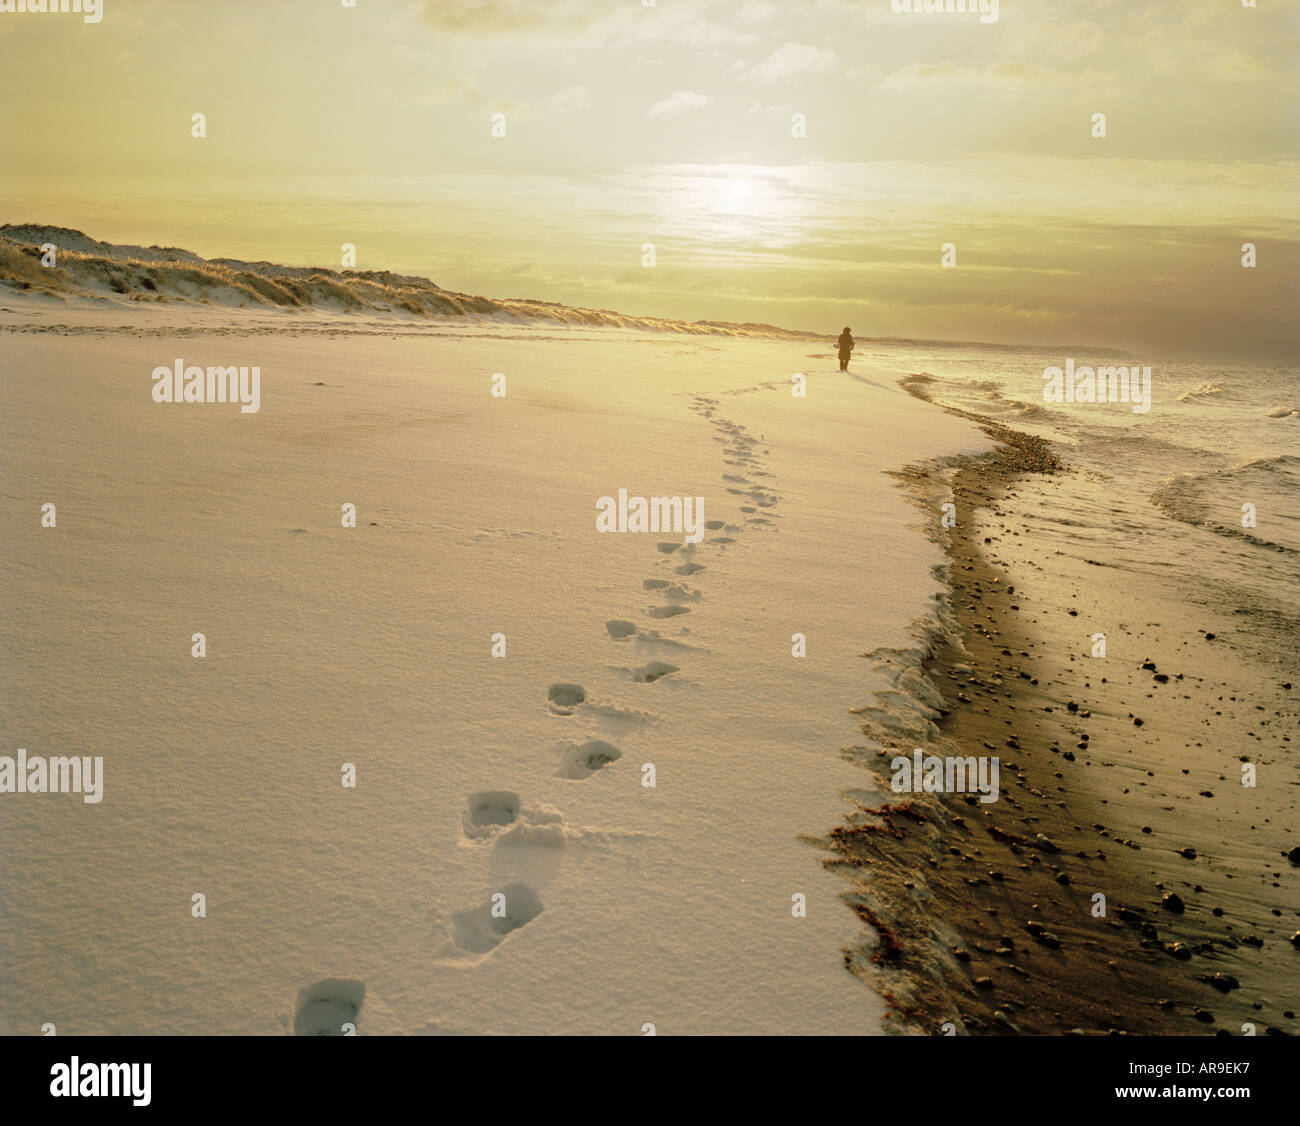 footprints in the snow and a person walking away in the distance on a beach southeast Sealand Denmark Stock Photo